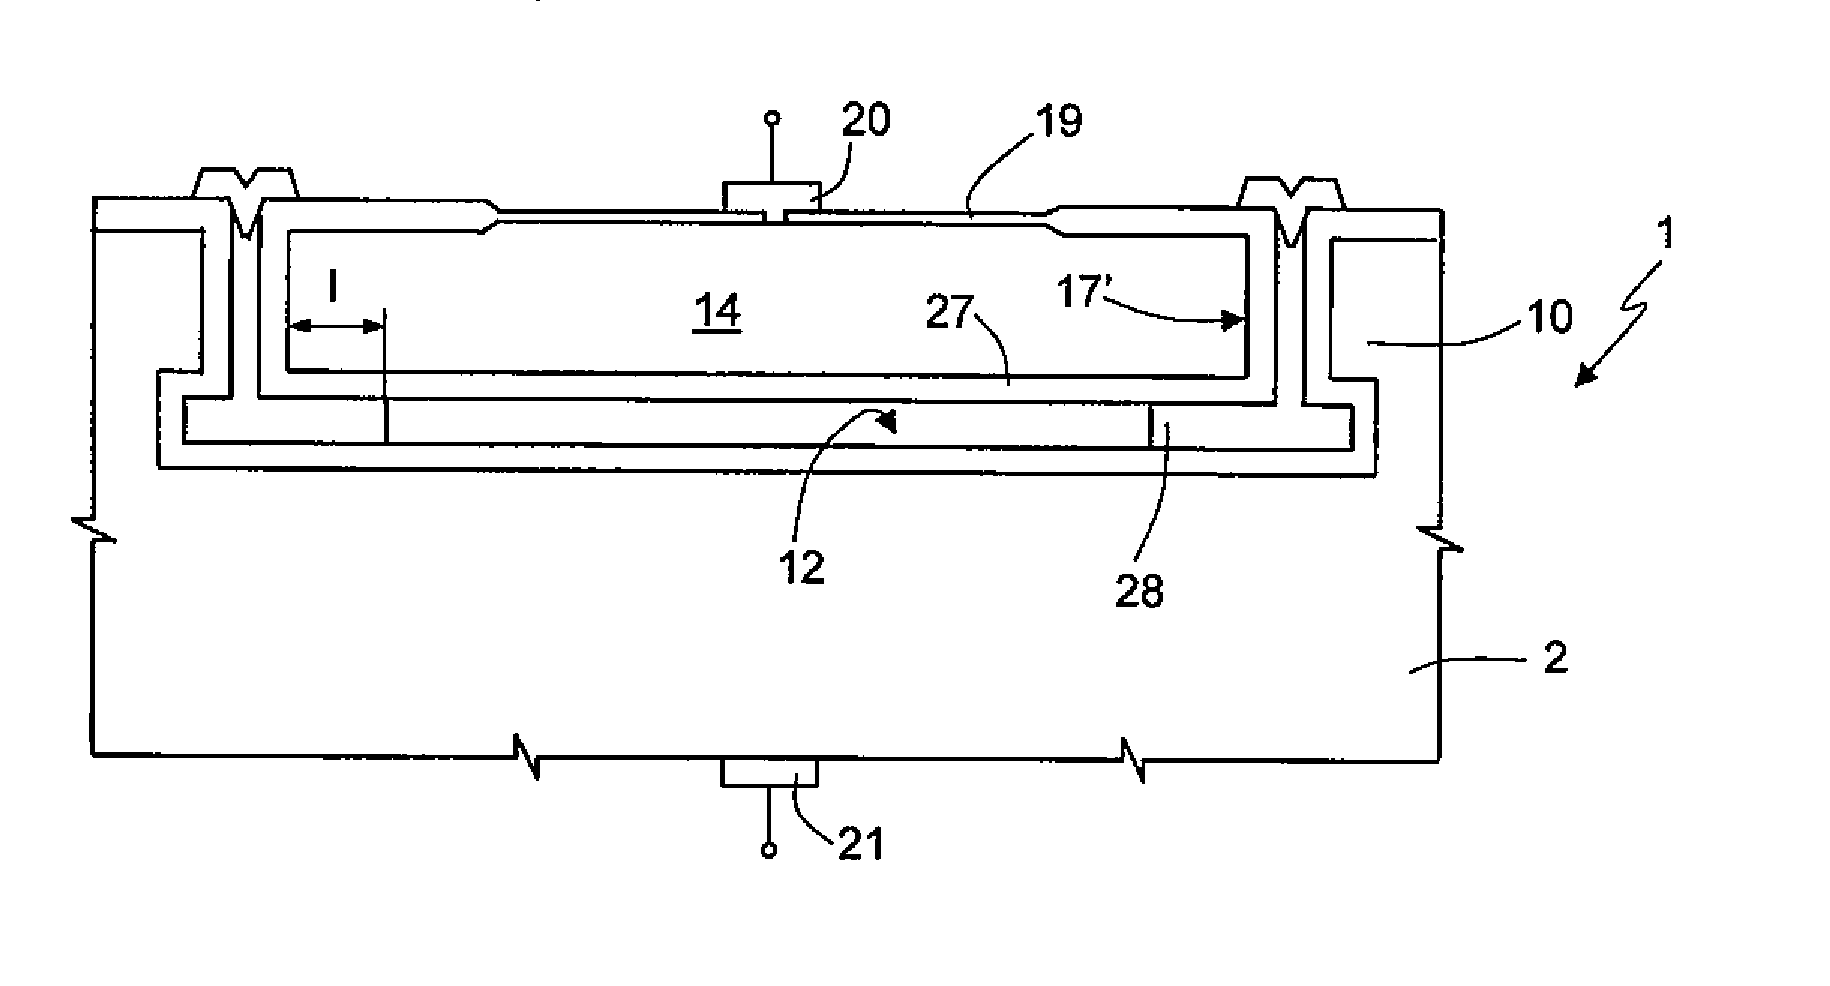 Process for manufacturing a membrane of semiconductor material integrated in, and electrically insulated from, a substrate